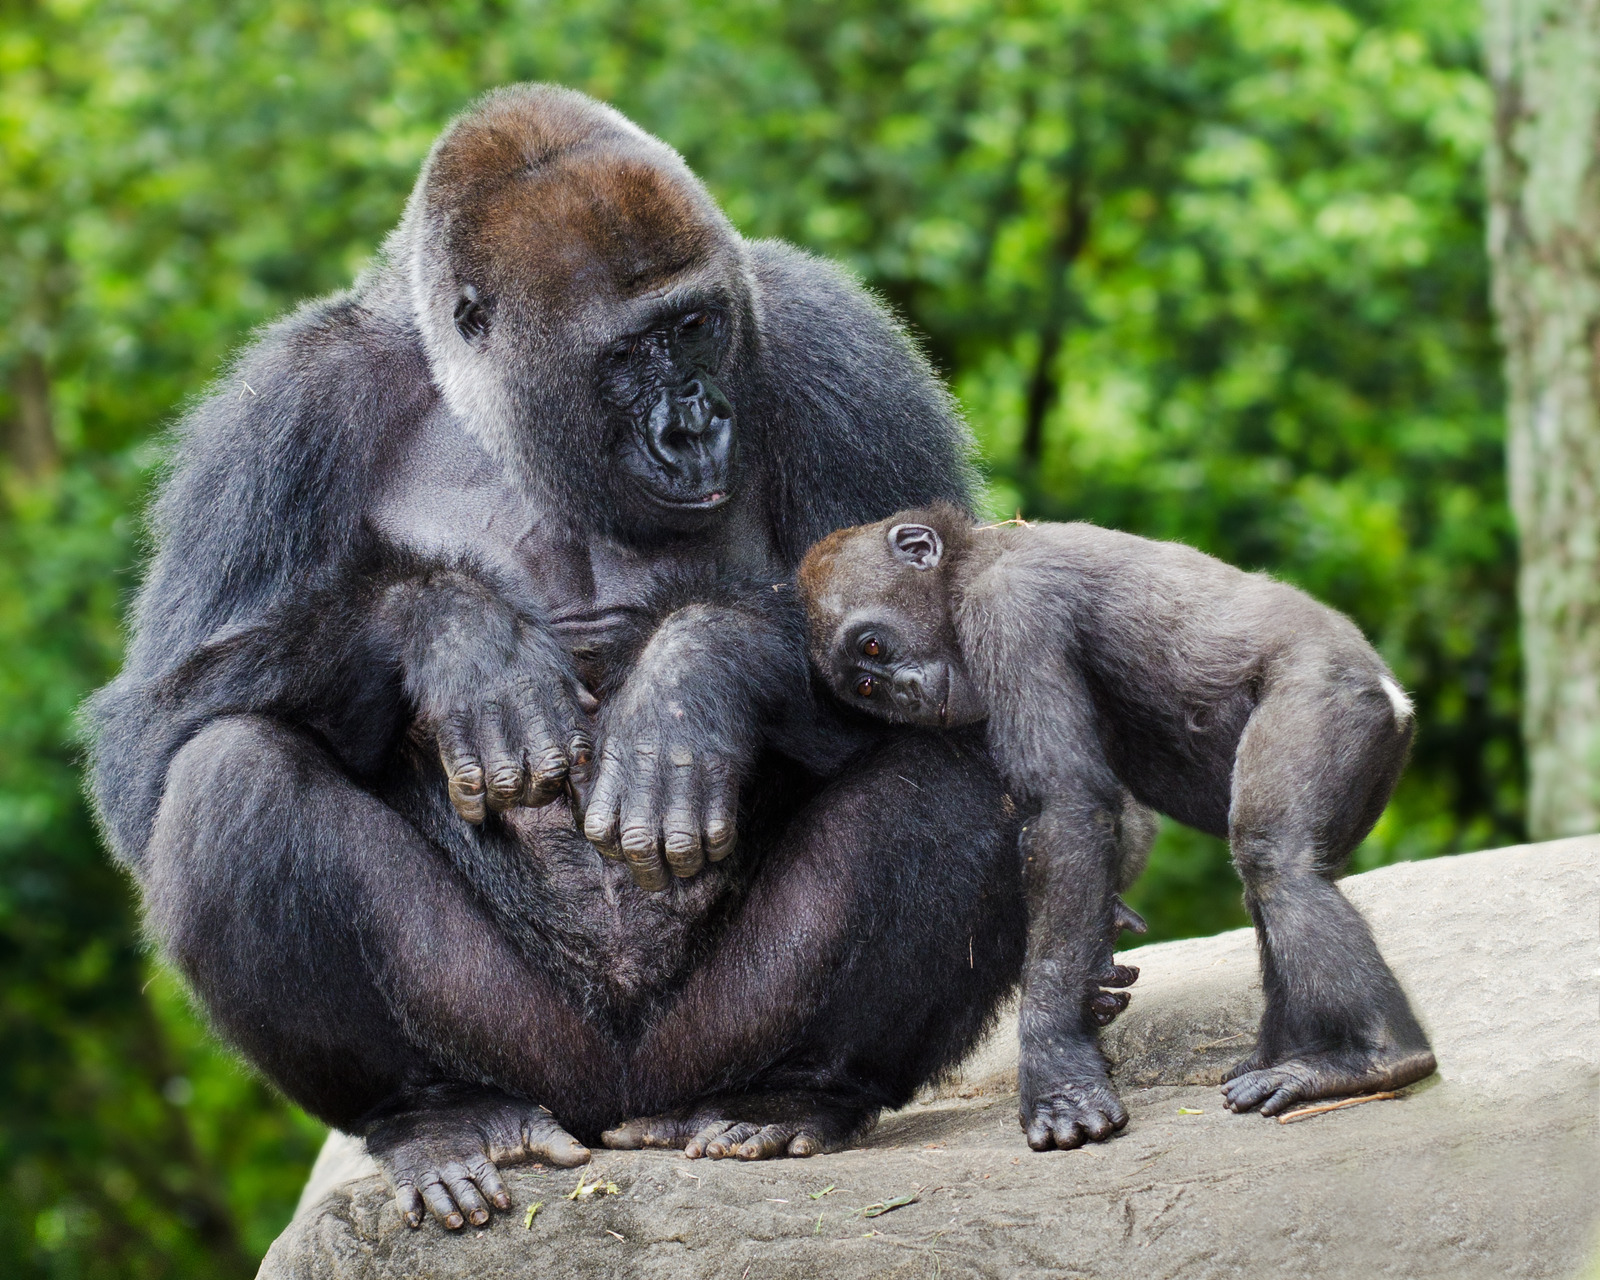 Female gorilla caring for her young..